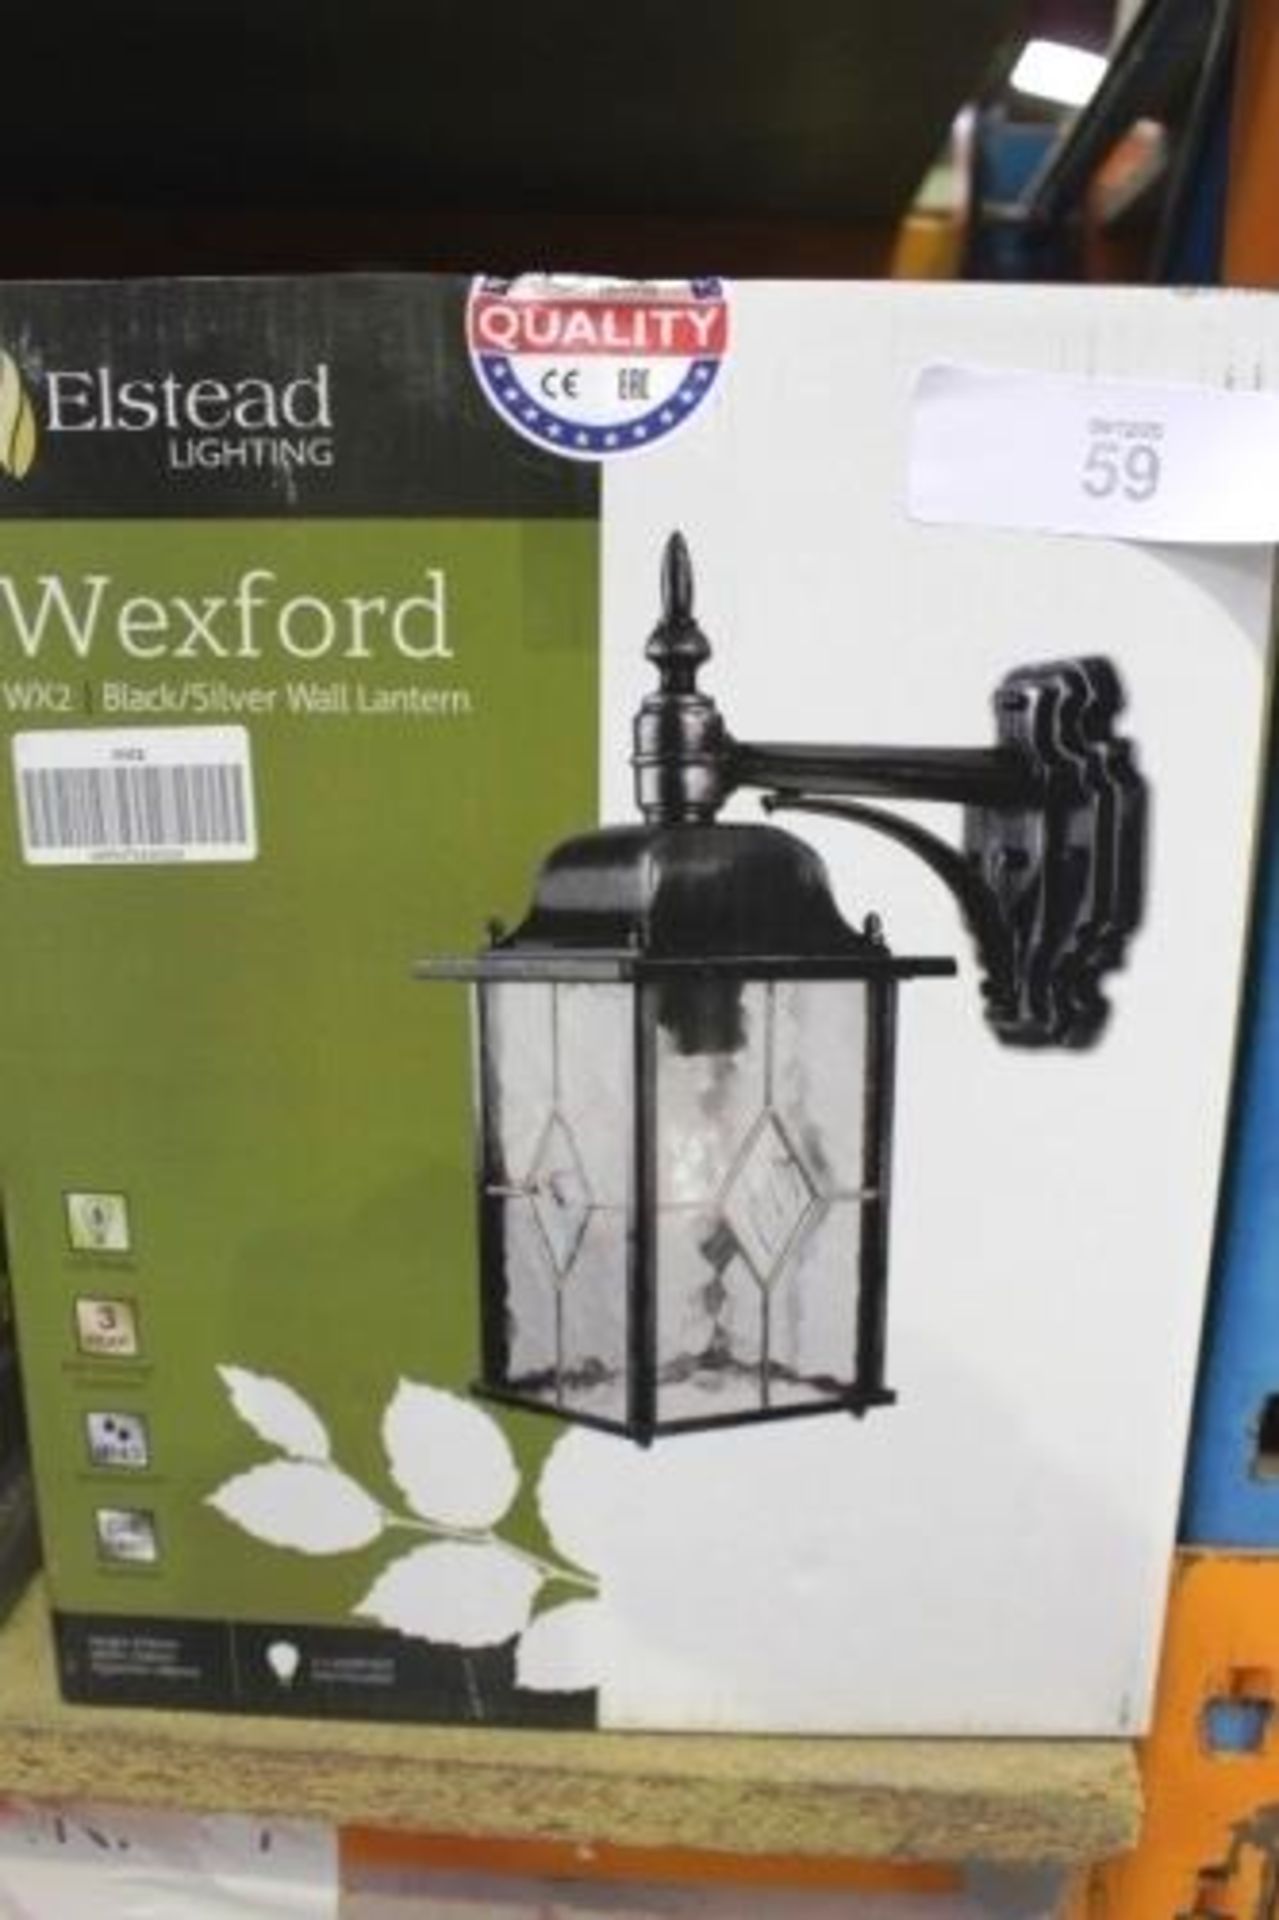 5 x Elstead Wexford black/silver wall lantern style outdoor lights, model WX2 - Sealed new in box (